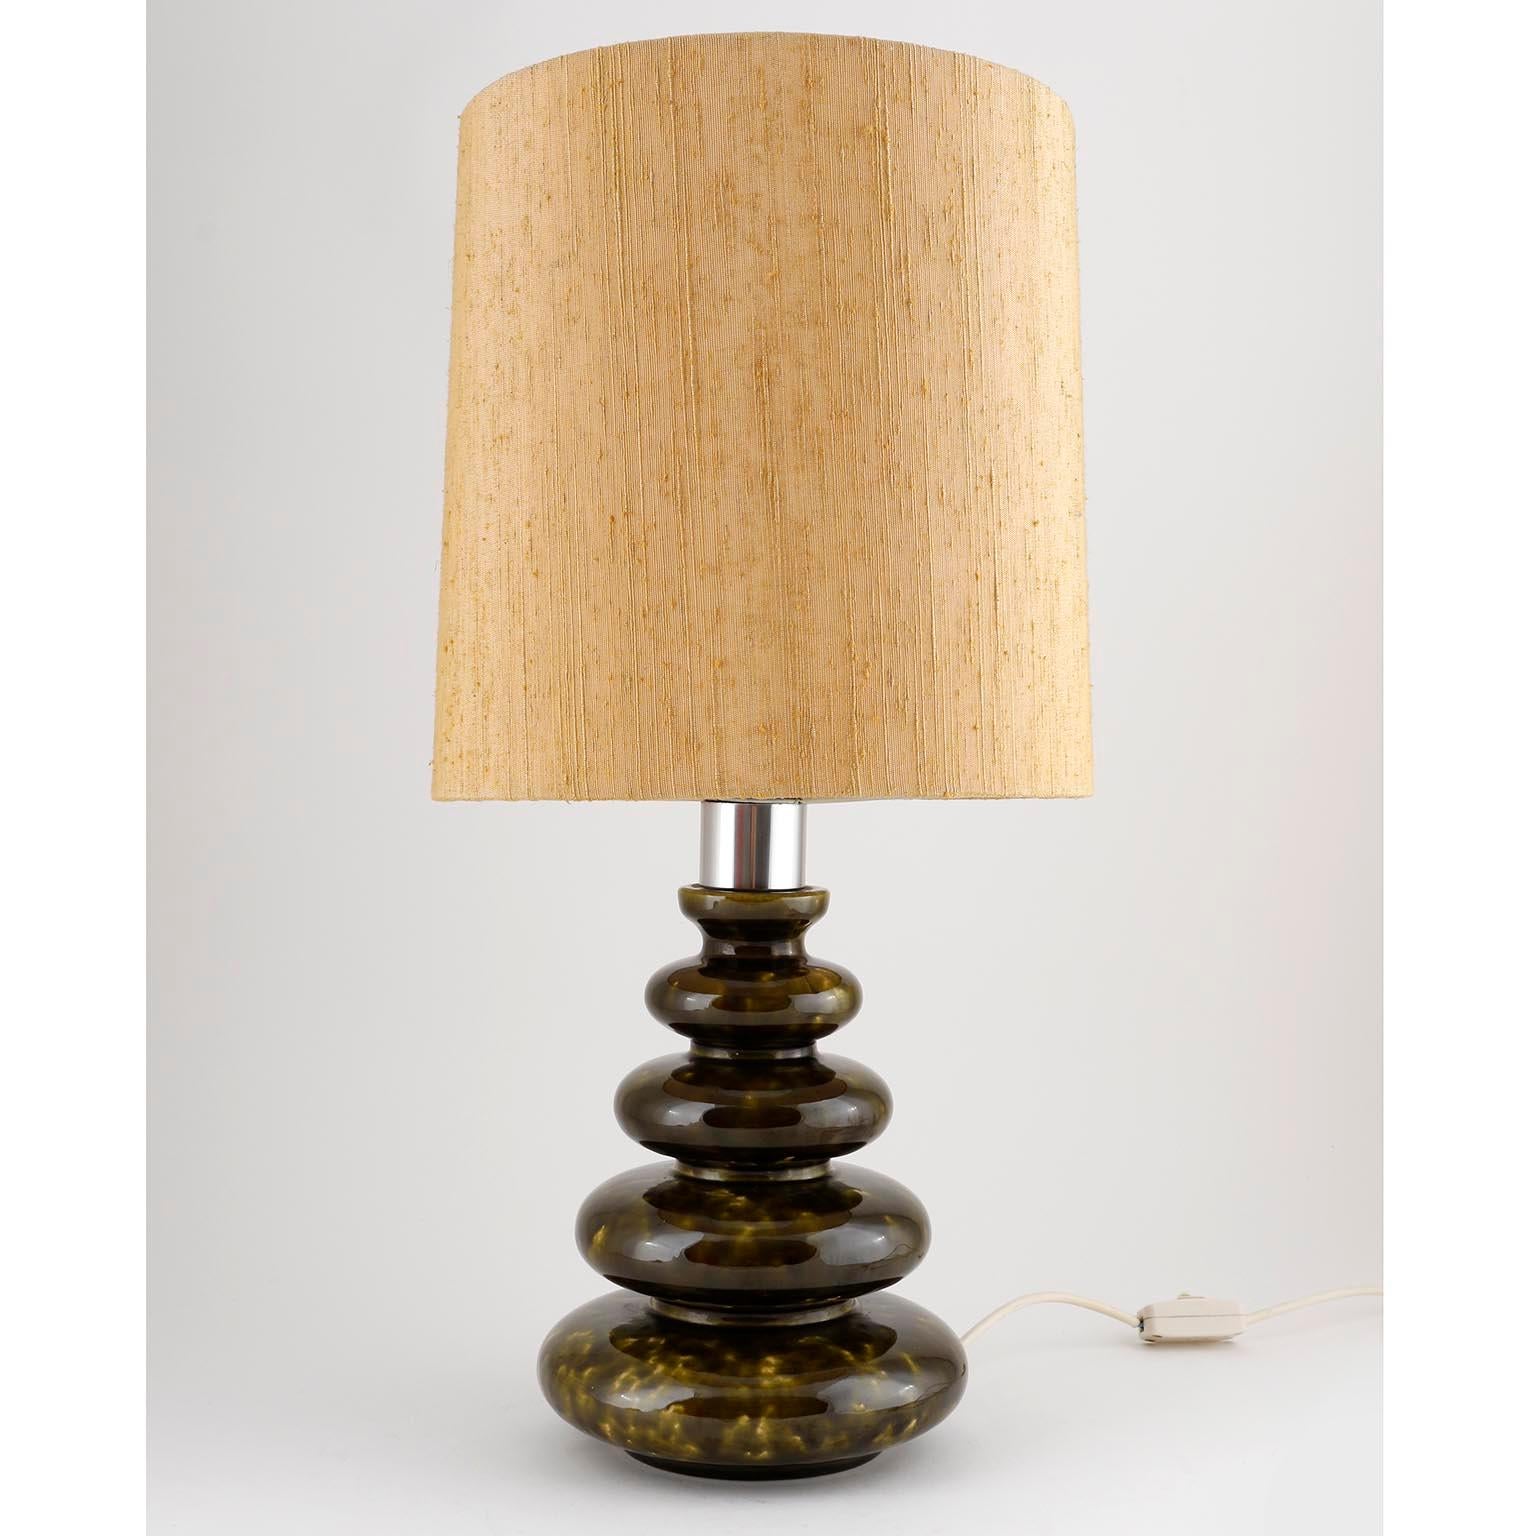 A pair of table lamps manufactured in midcentury, circa 1970s.
The stand is made of a light and dark or moss green-brindled glazed ceramic Stand with and a chromed lamp shade holder.
The original lampshades are in good condition and made of a